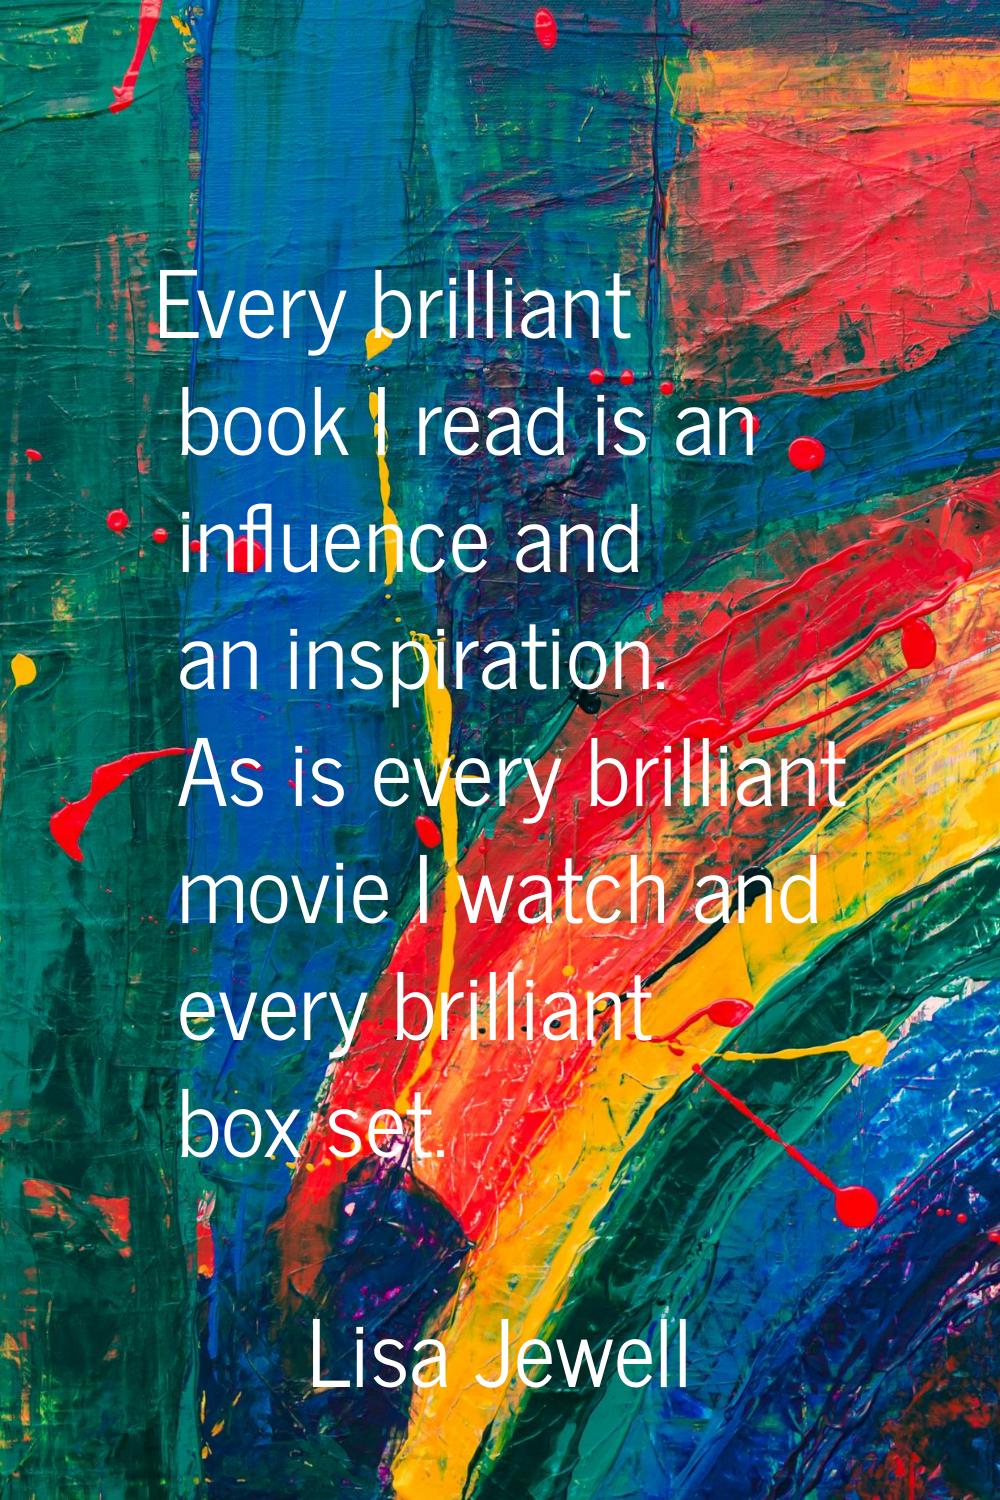 Every brilliant book I read is an influence and an inspiration. As is every brilliant movie I watch